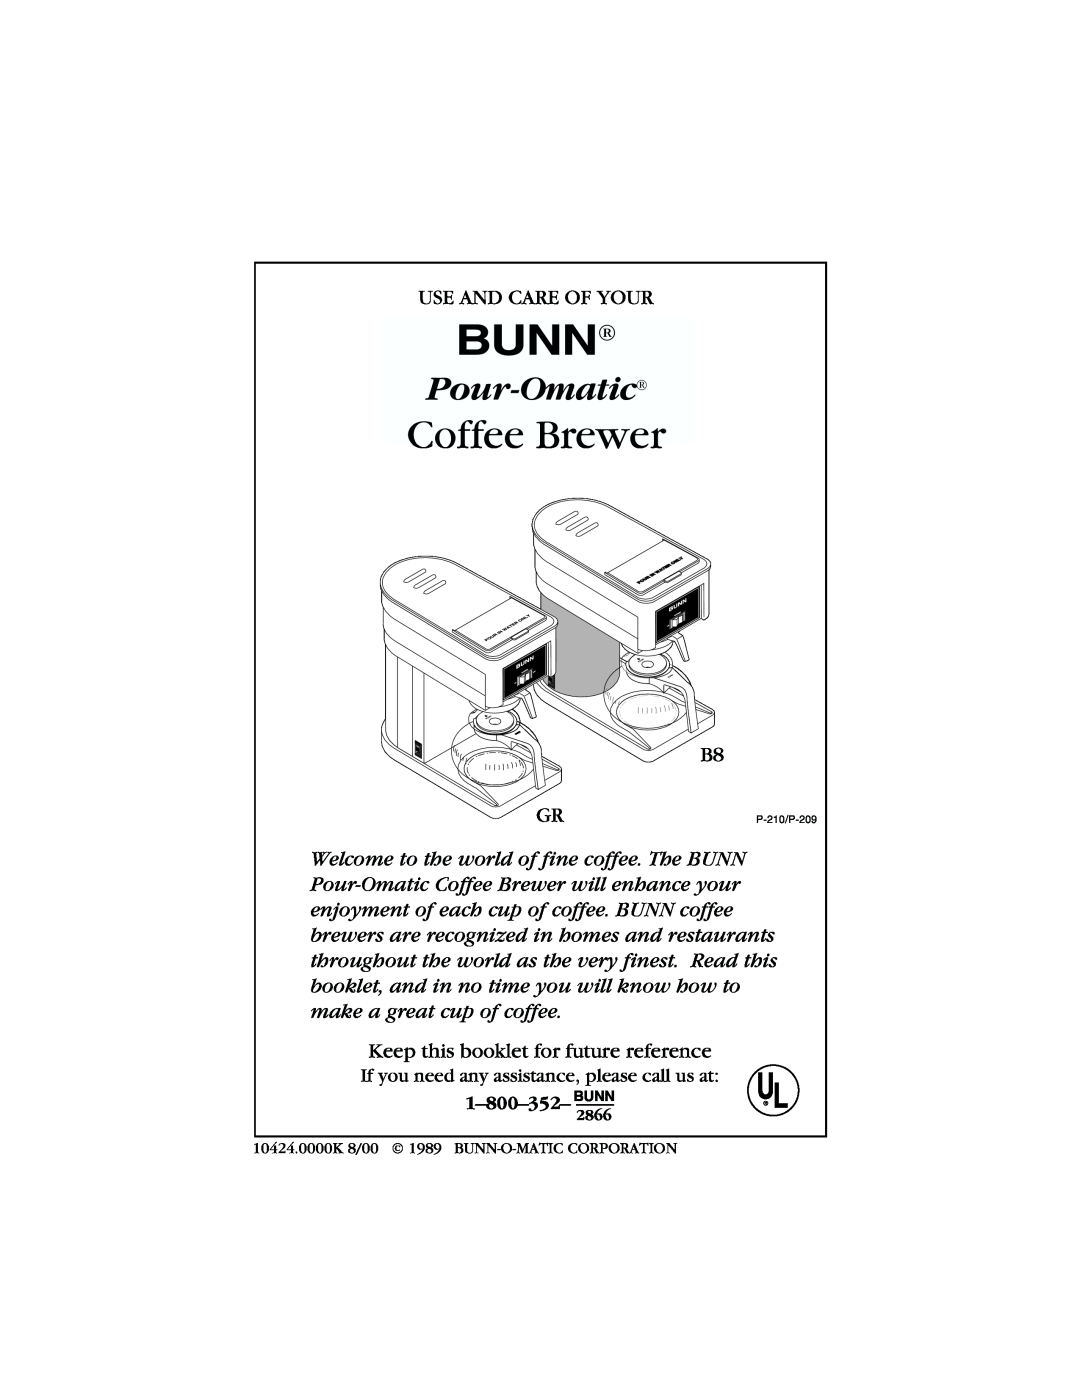 Bunn B8, GR manual Pour-Omatic, Use And Care Of Your, Keep this booklet for future reference, Bunn, Coffee Brewer 